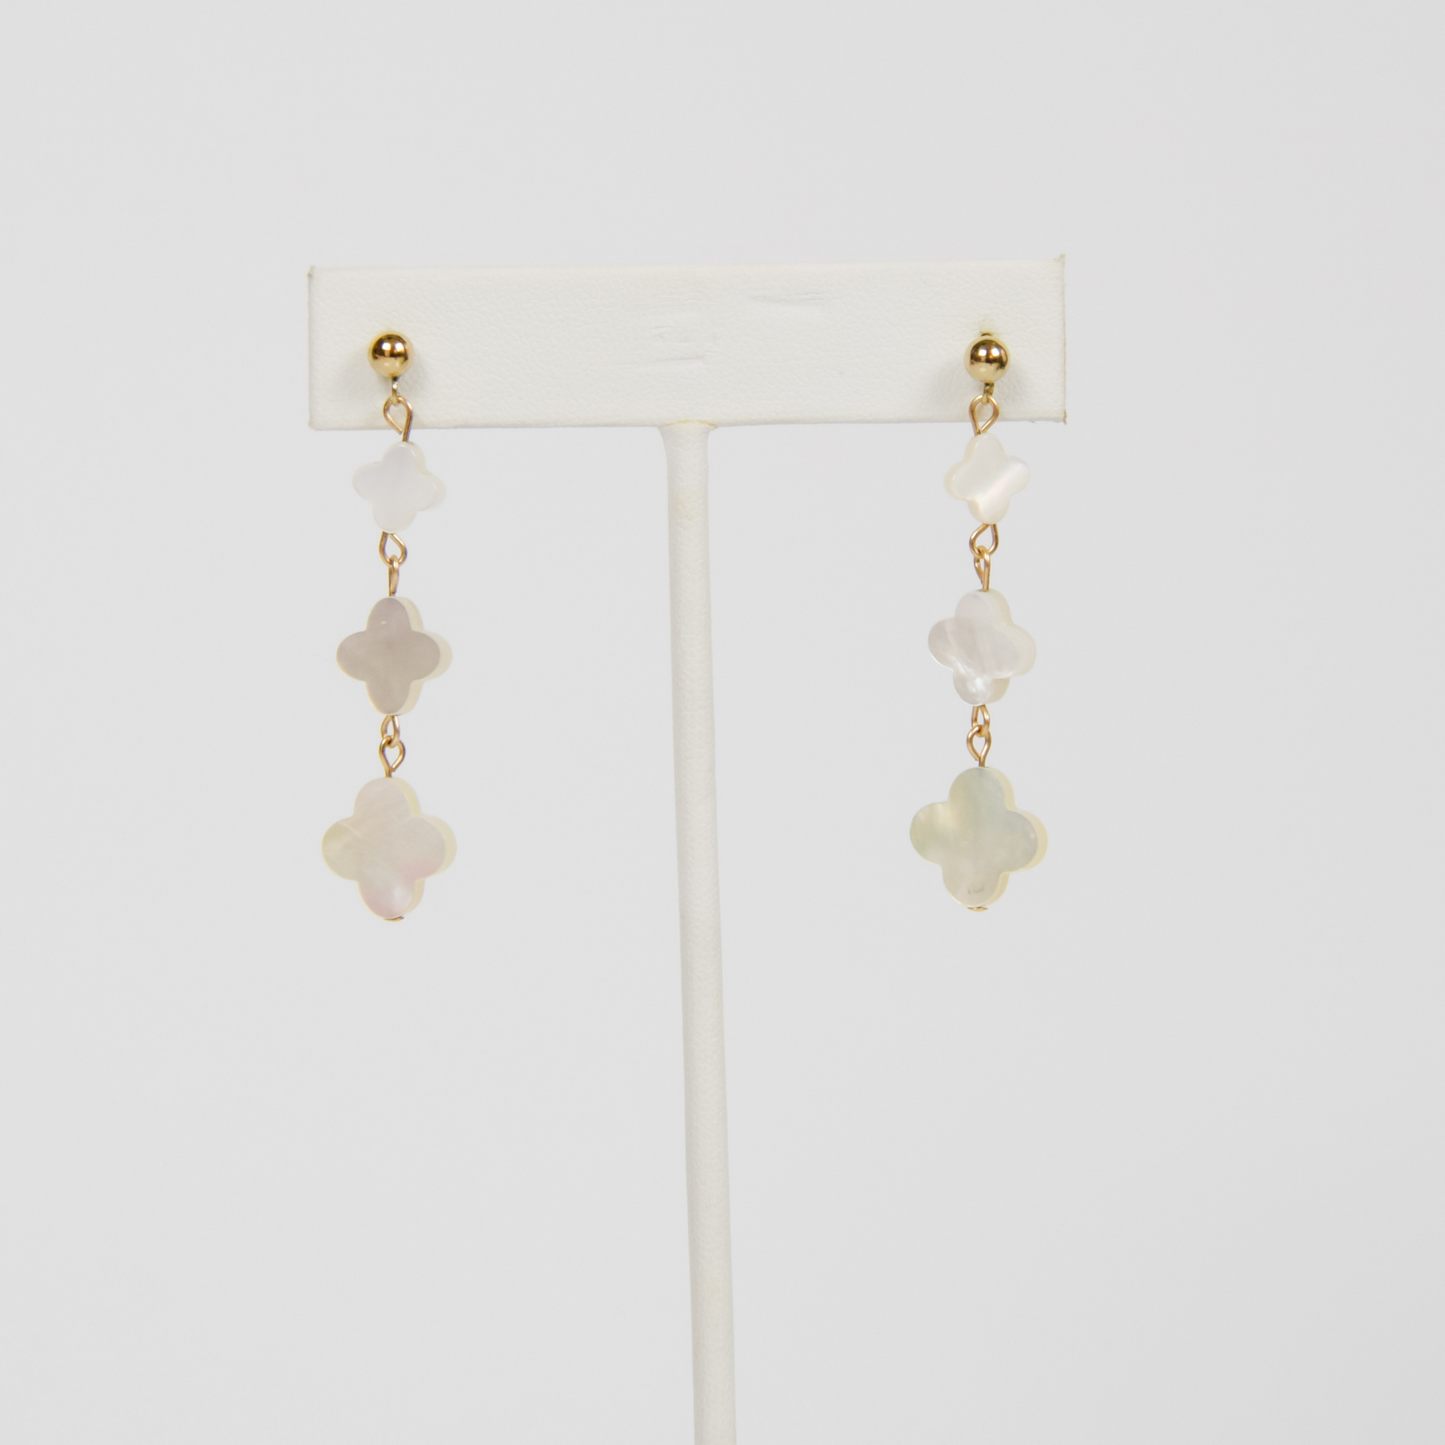 Floral Mother of Pearl Earrings